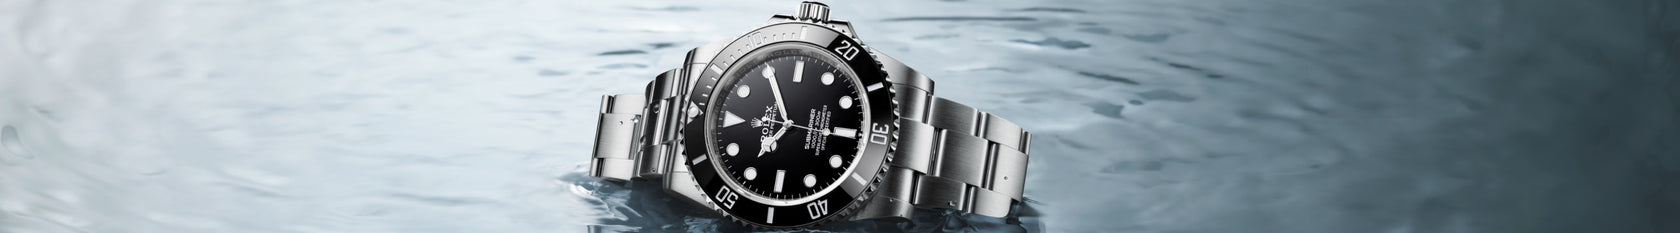 Rolex Submariner no-date lying on its side in the water, crown up. Model #124060.